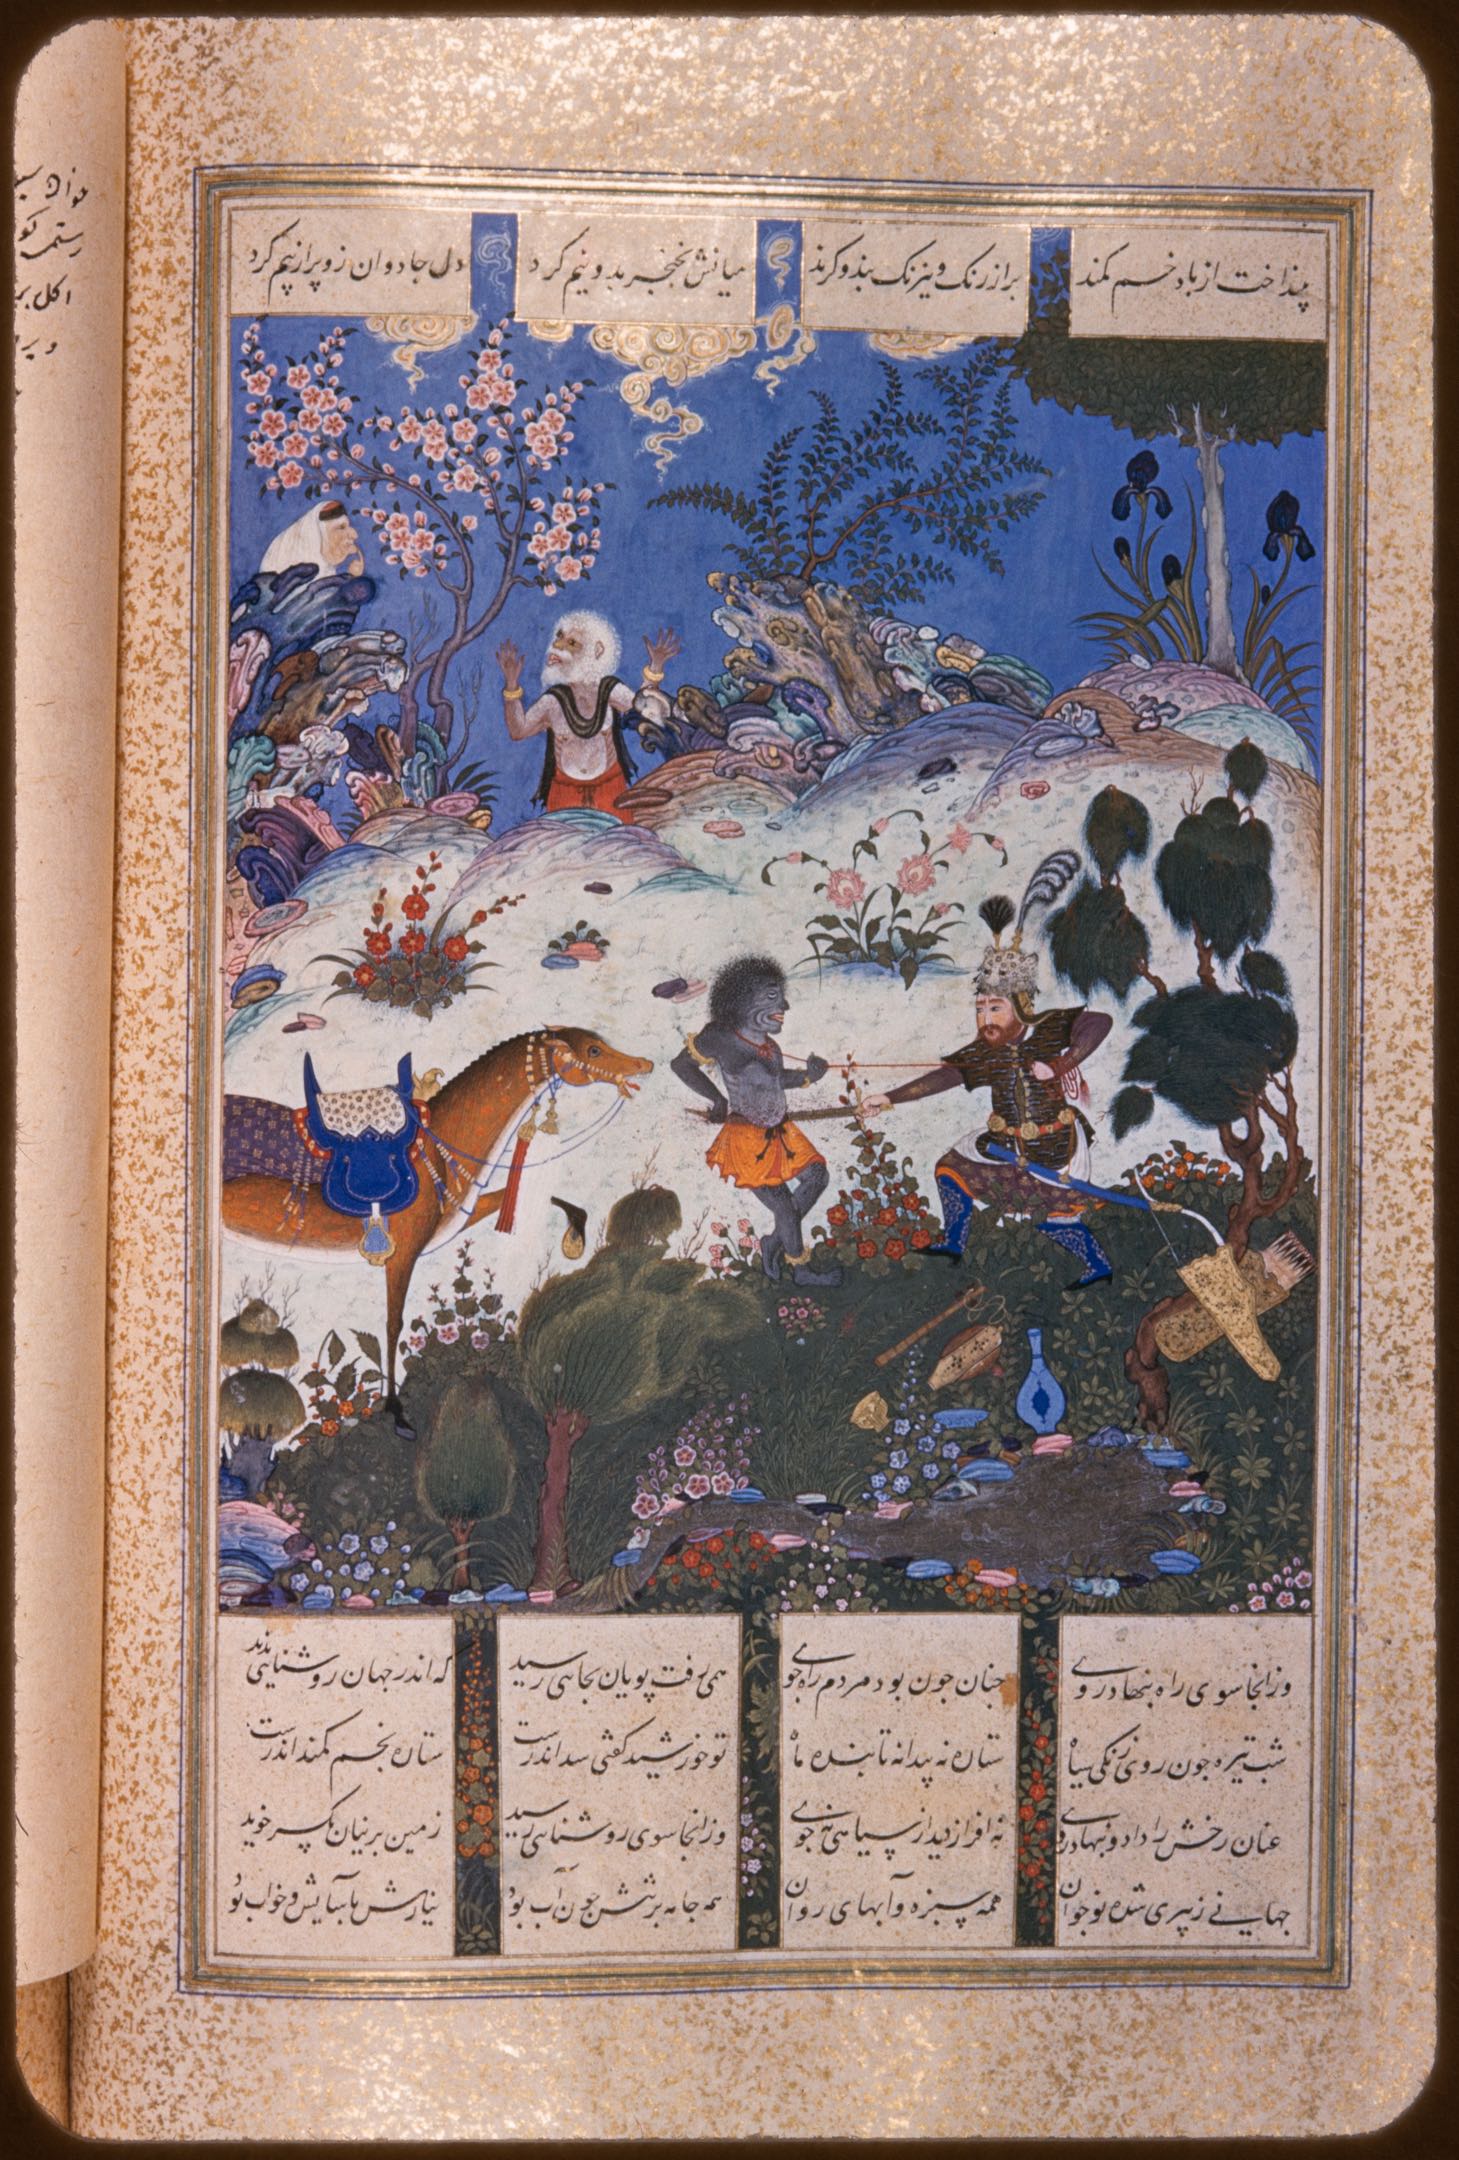 Rustam's Fourth Course: He Cleaves a Witch (MMA, NY 1970.201.17), f. 120v from the Houghton Shahnama